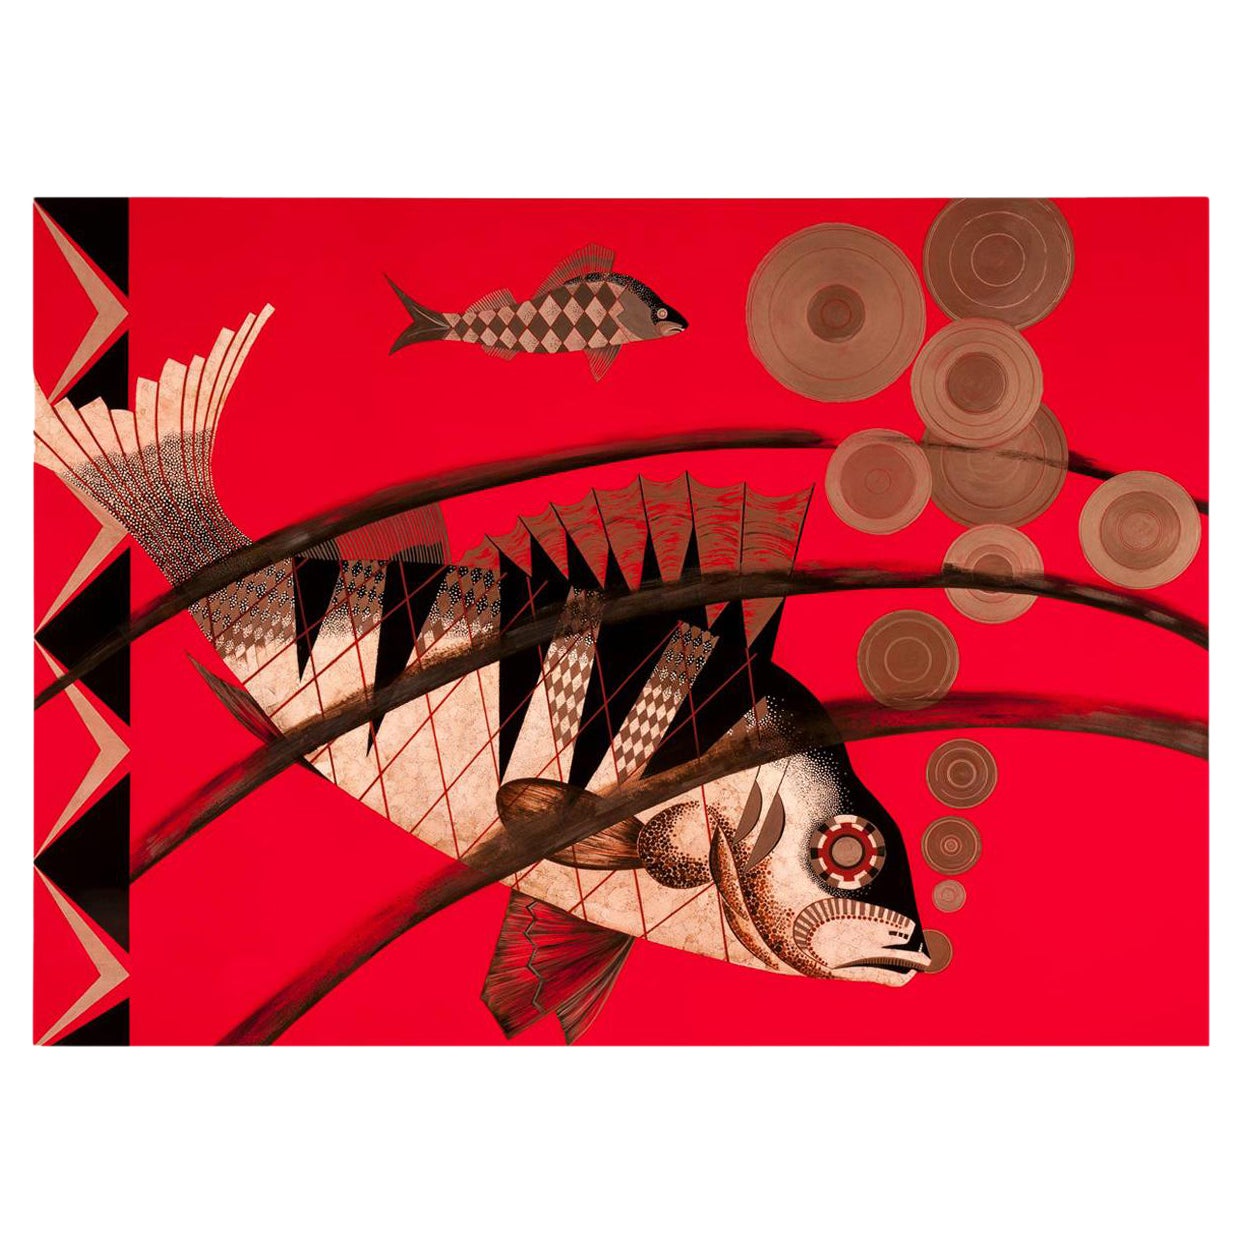 Pollaro Eggshell Inlay and Lacquer Fish Art Inspired by Jean Dunand For Sale